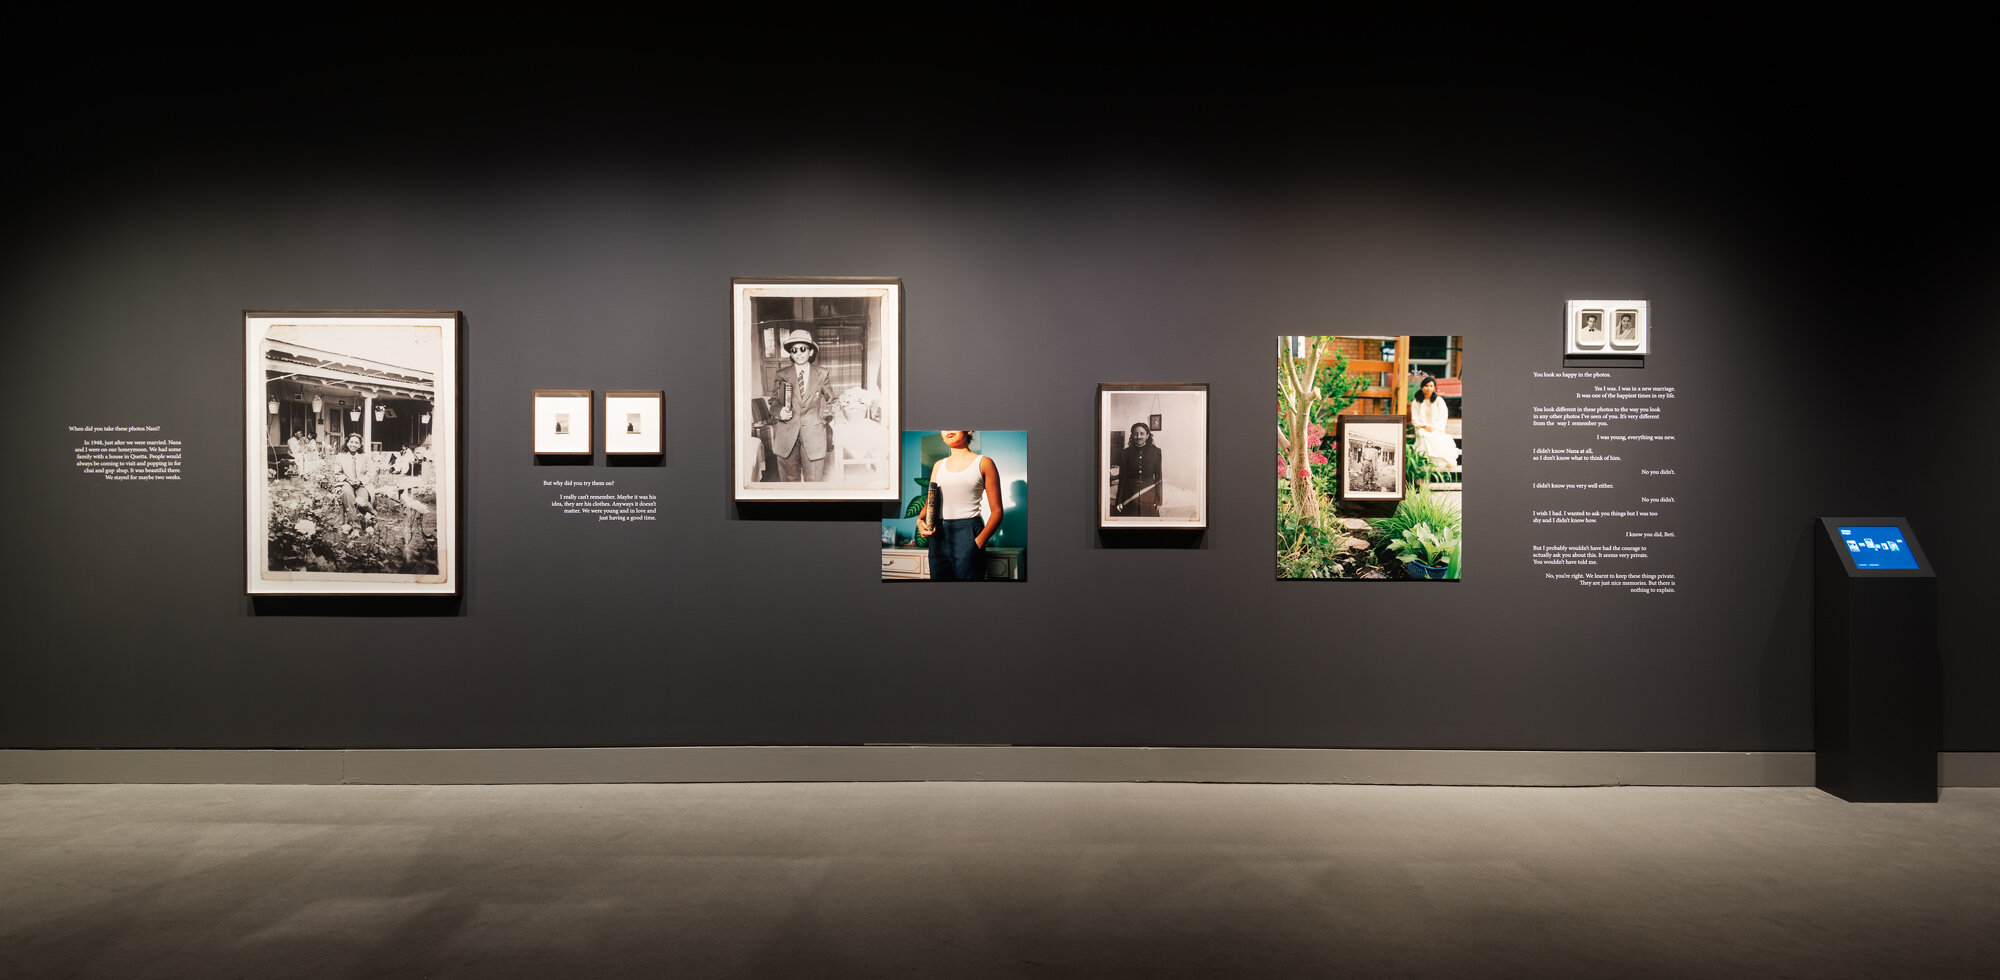  Installation view from the  New Generation Photography Award , National Gallery of Canada, Ottawa 2019. © National Gallery of Canada 